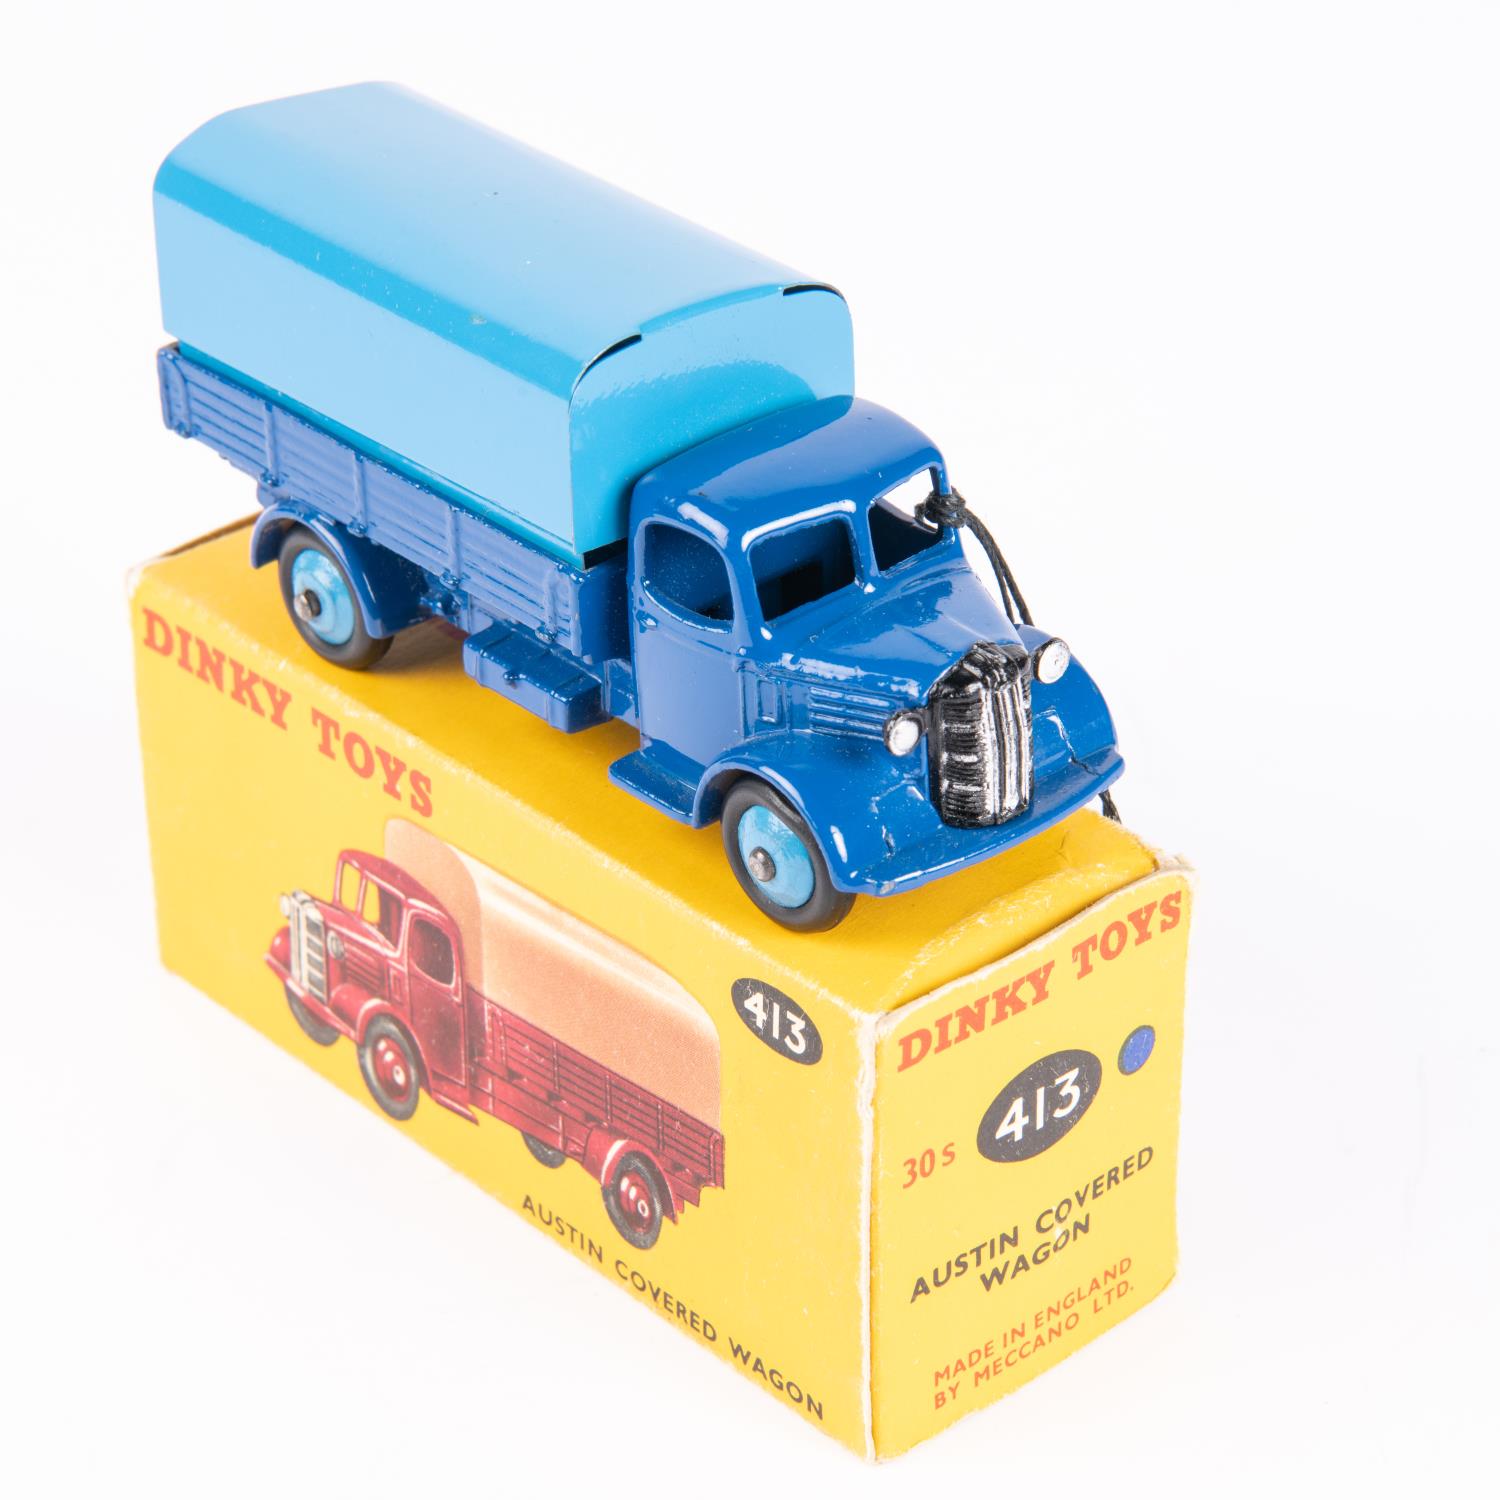 A Dinky Toys Austin Covered Wagon (413). In dark blue with mid-blue tin-plate tilt and wheels.